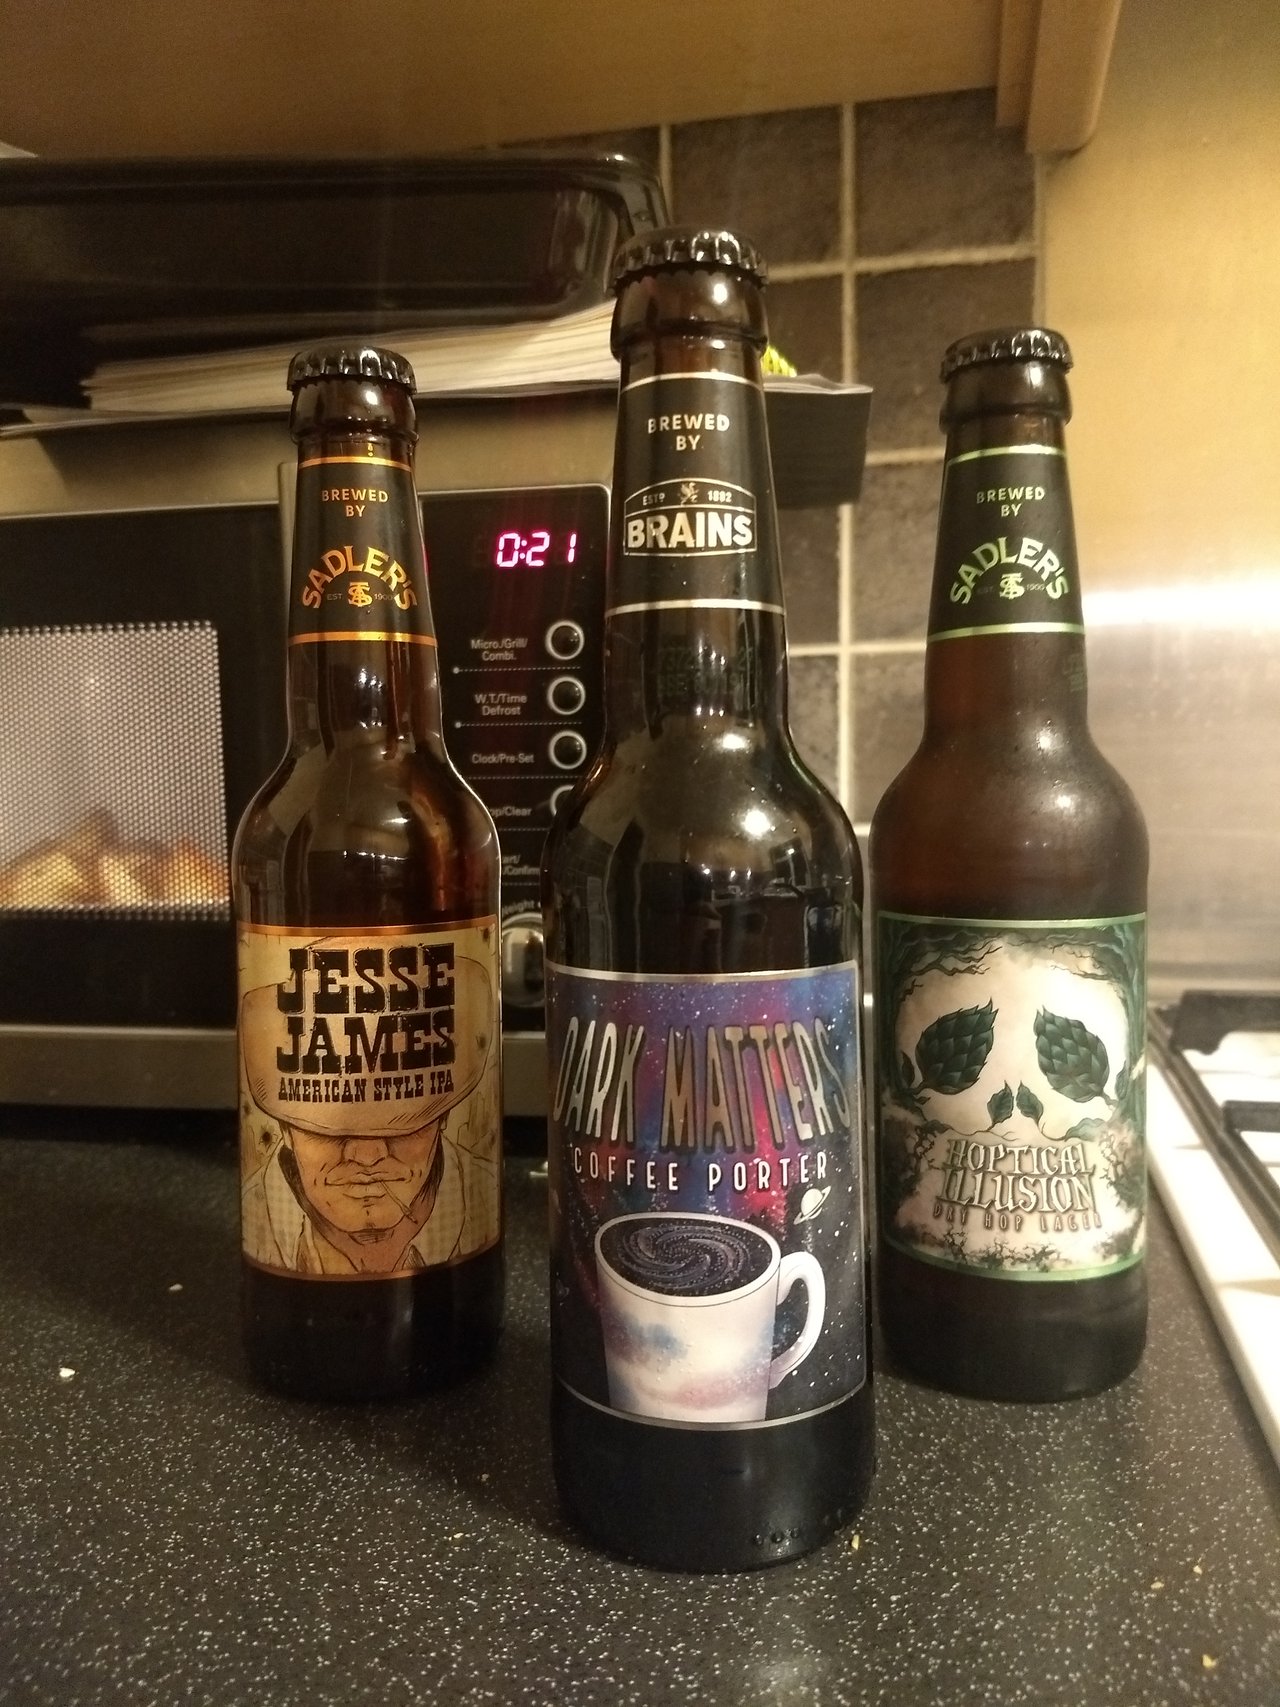 Zľava Jesse James American style IPA, Dark Matters coffee porter a Hoptical illusion dry hop lager